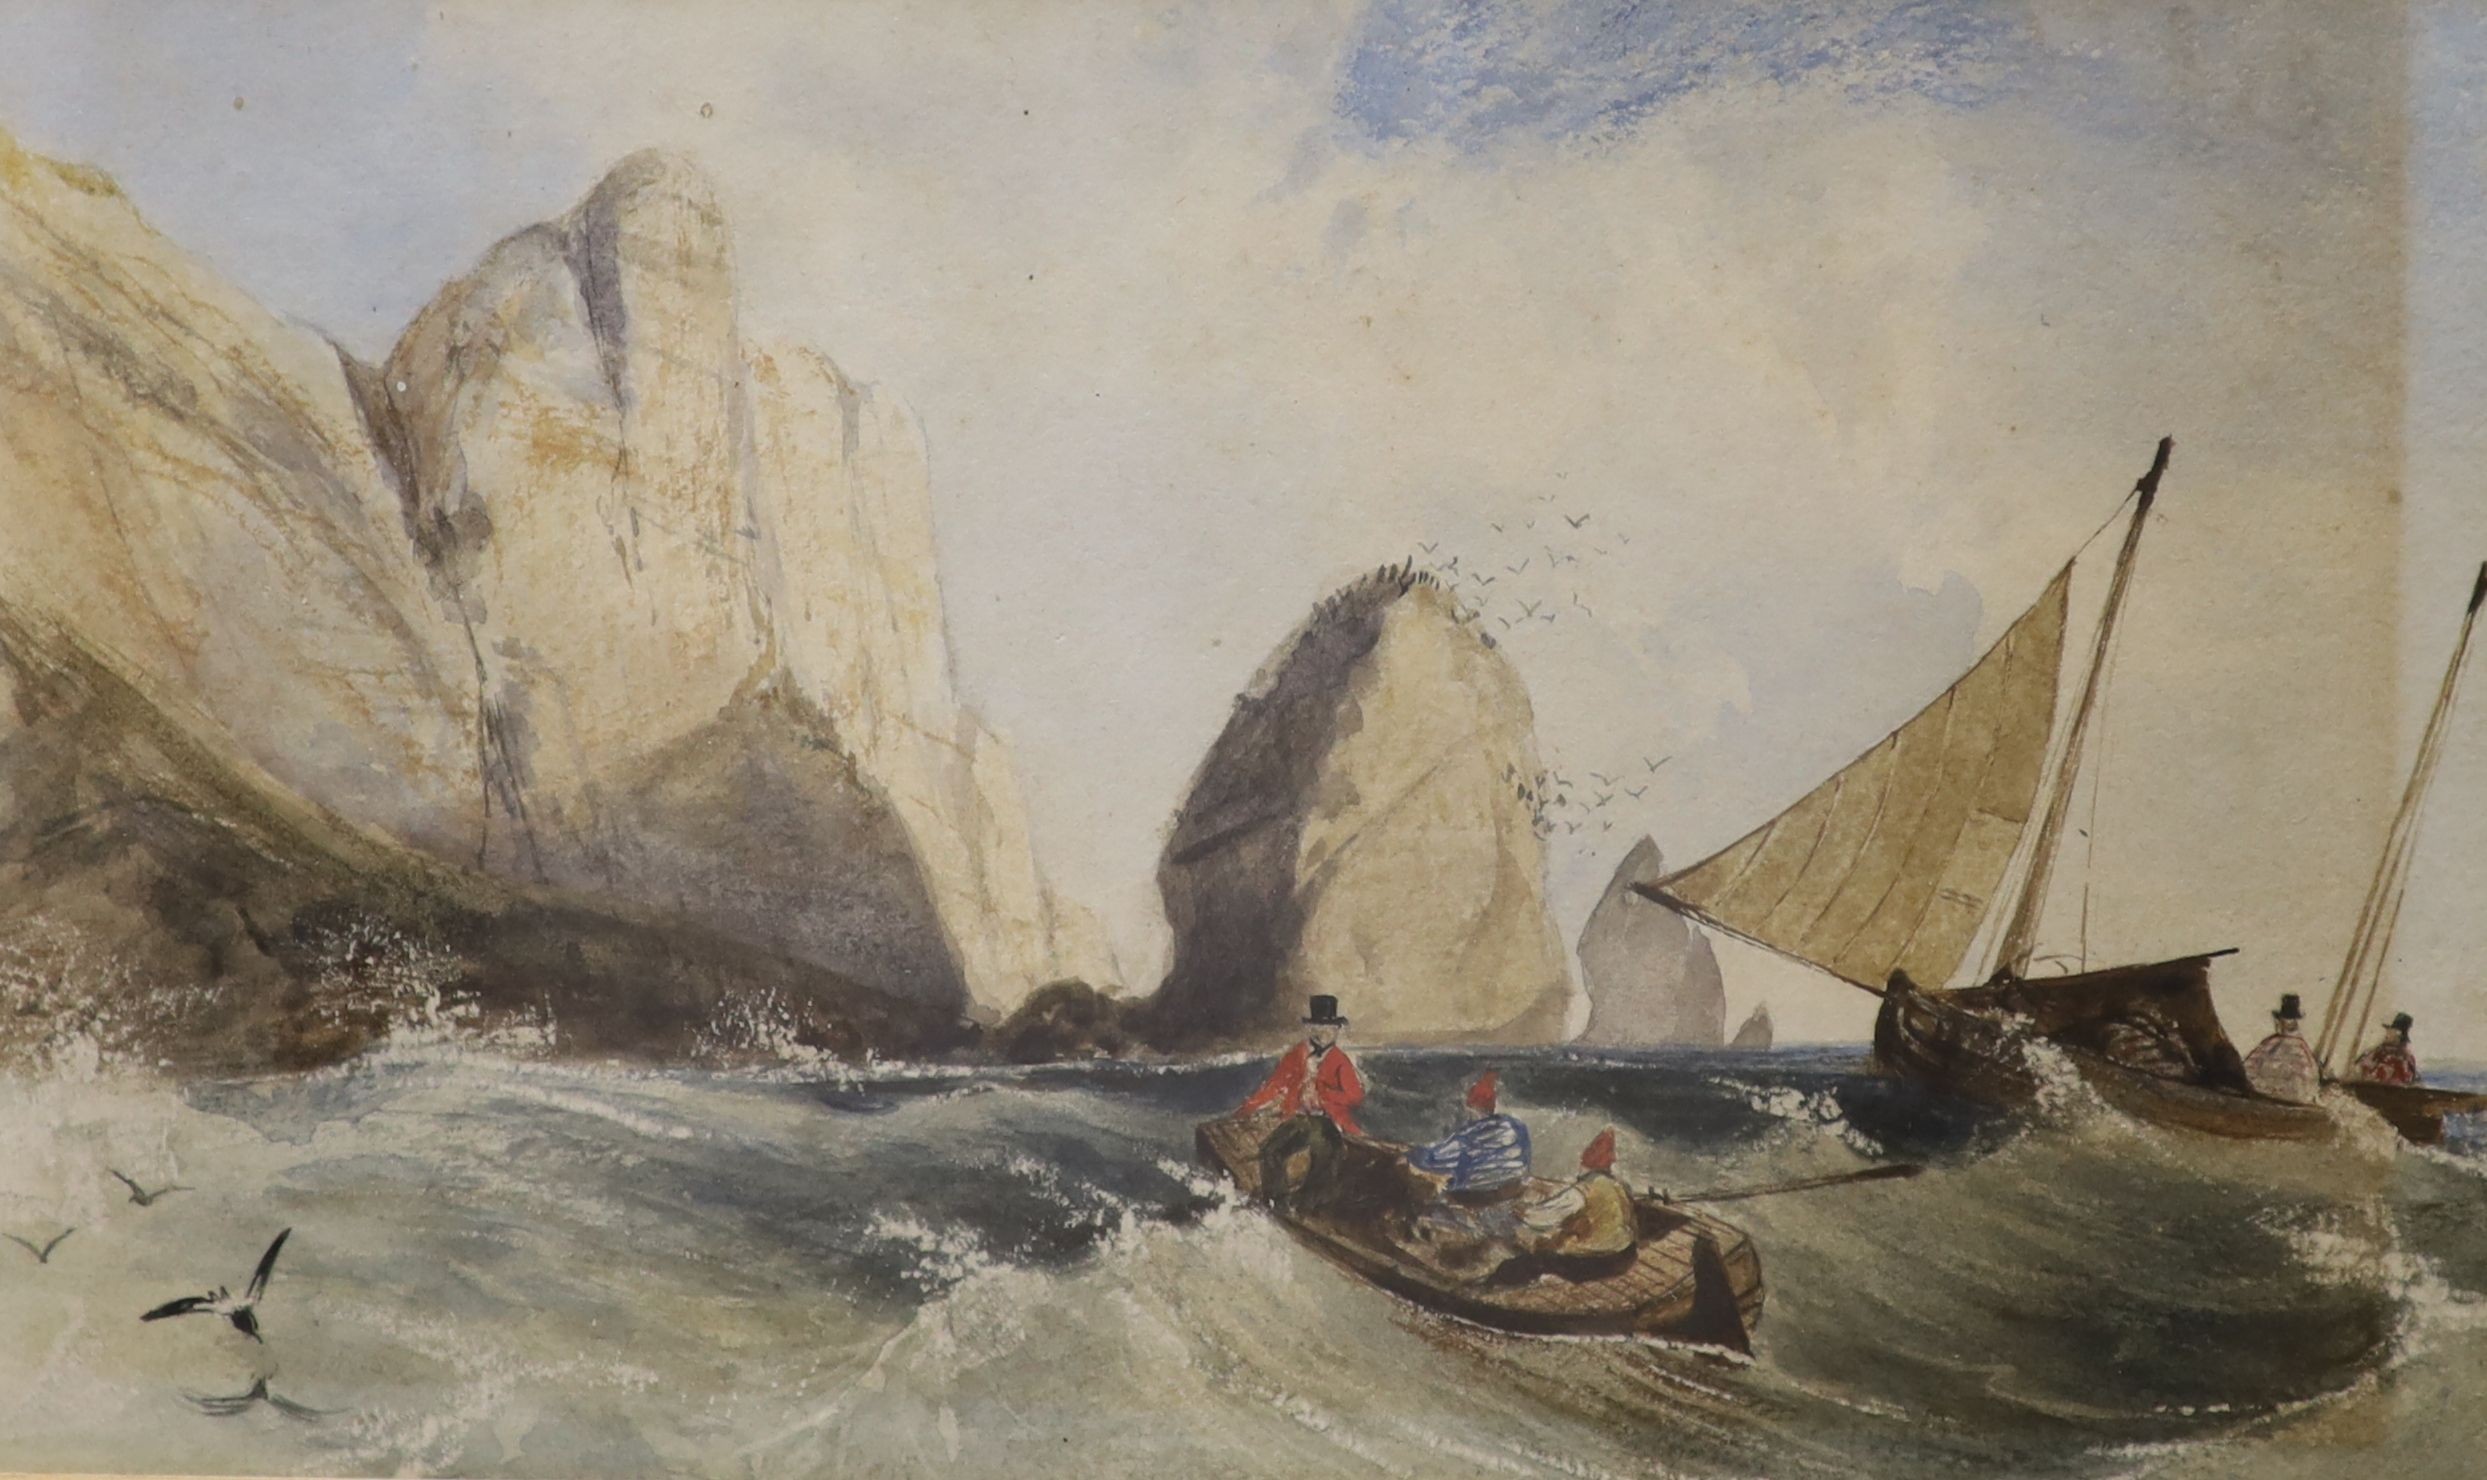 William Roxby Beverley (1811-1889), watercolour, Boats by the rocks, signed verso 14 x 23cm